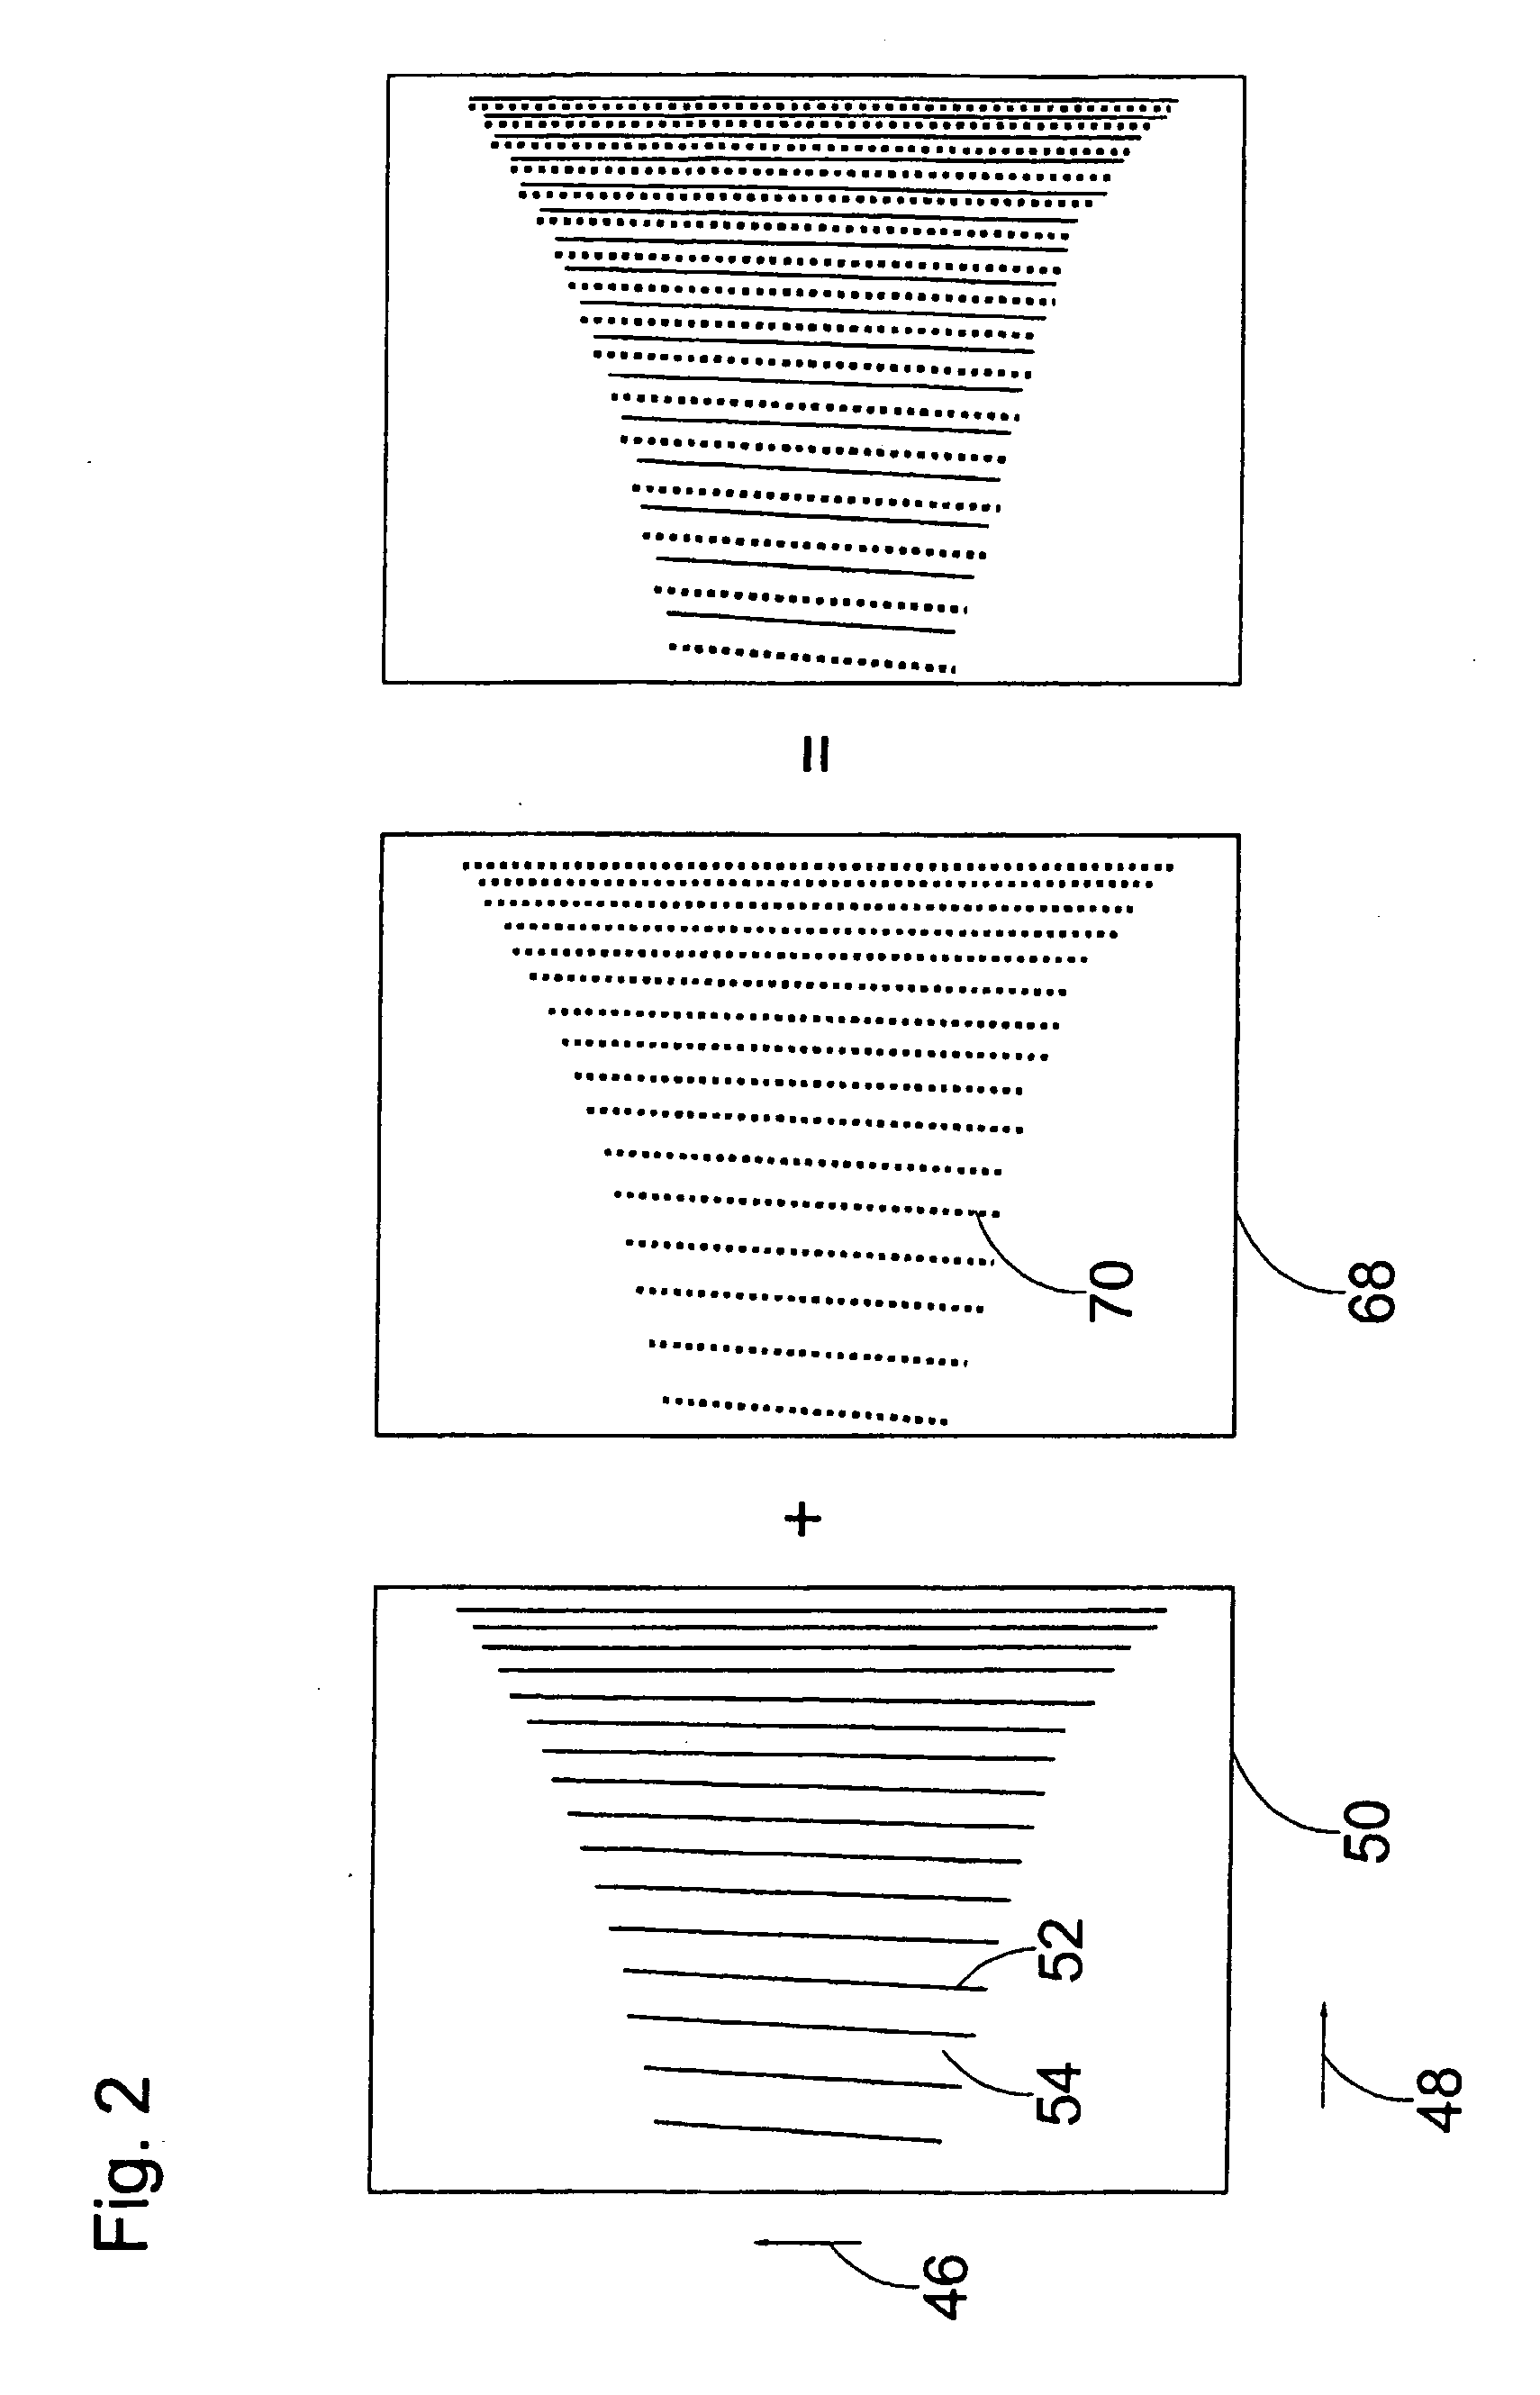 Echelle Spectometer with Improved Use of the Detector by Means of Two Spectrometer Arrangements